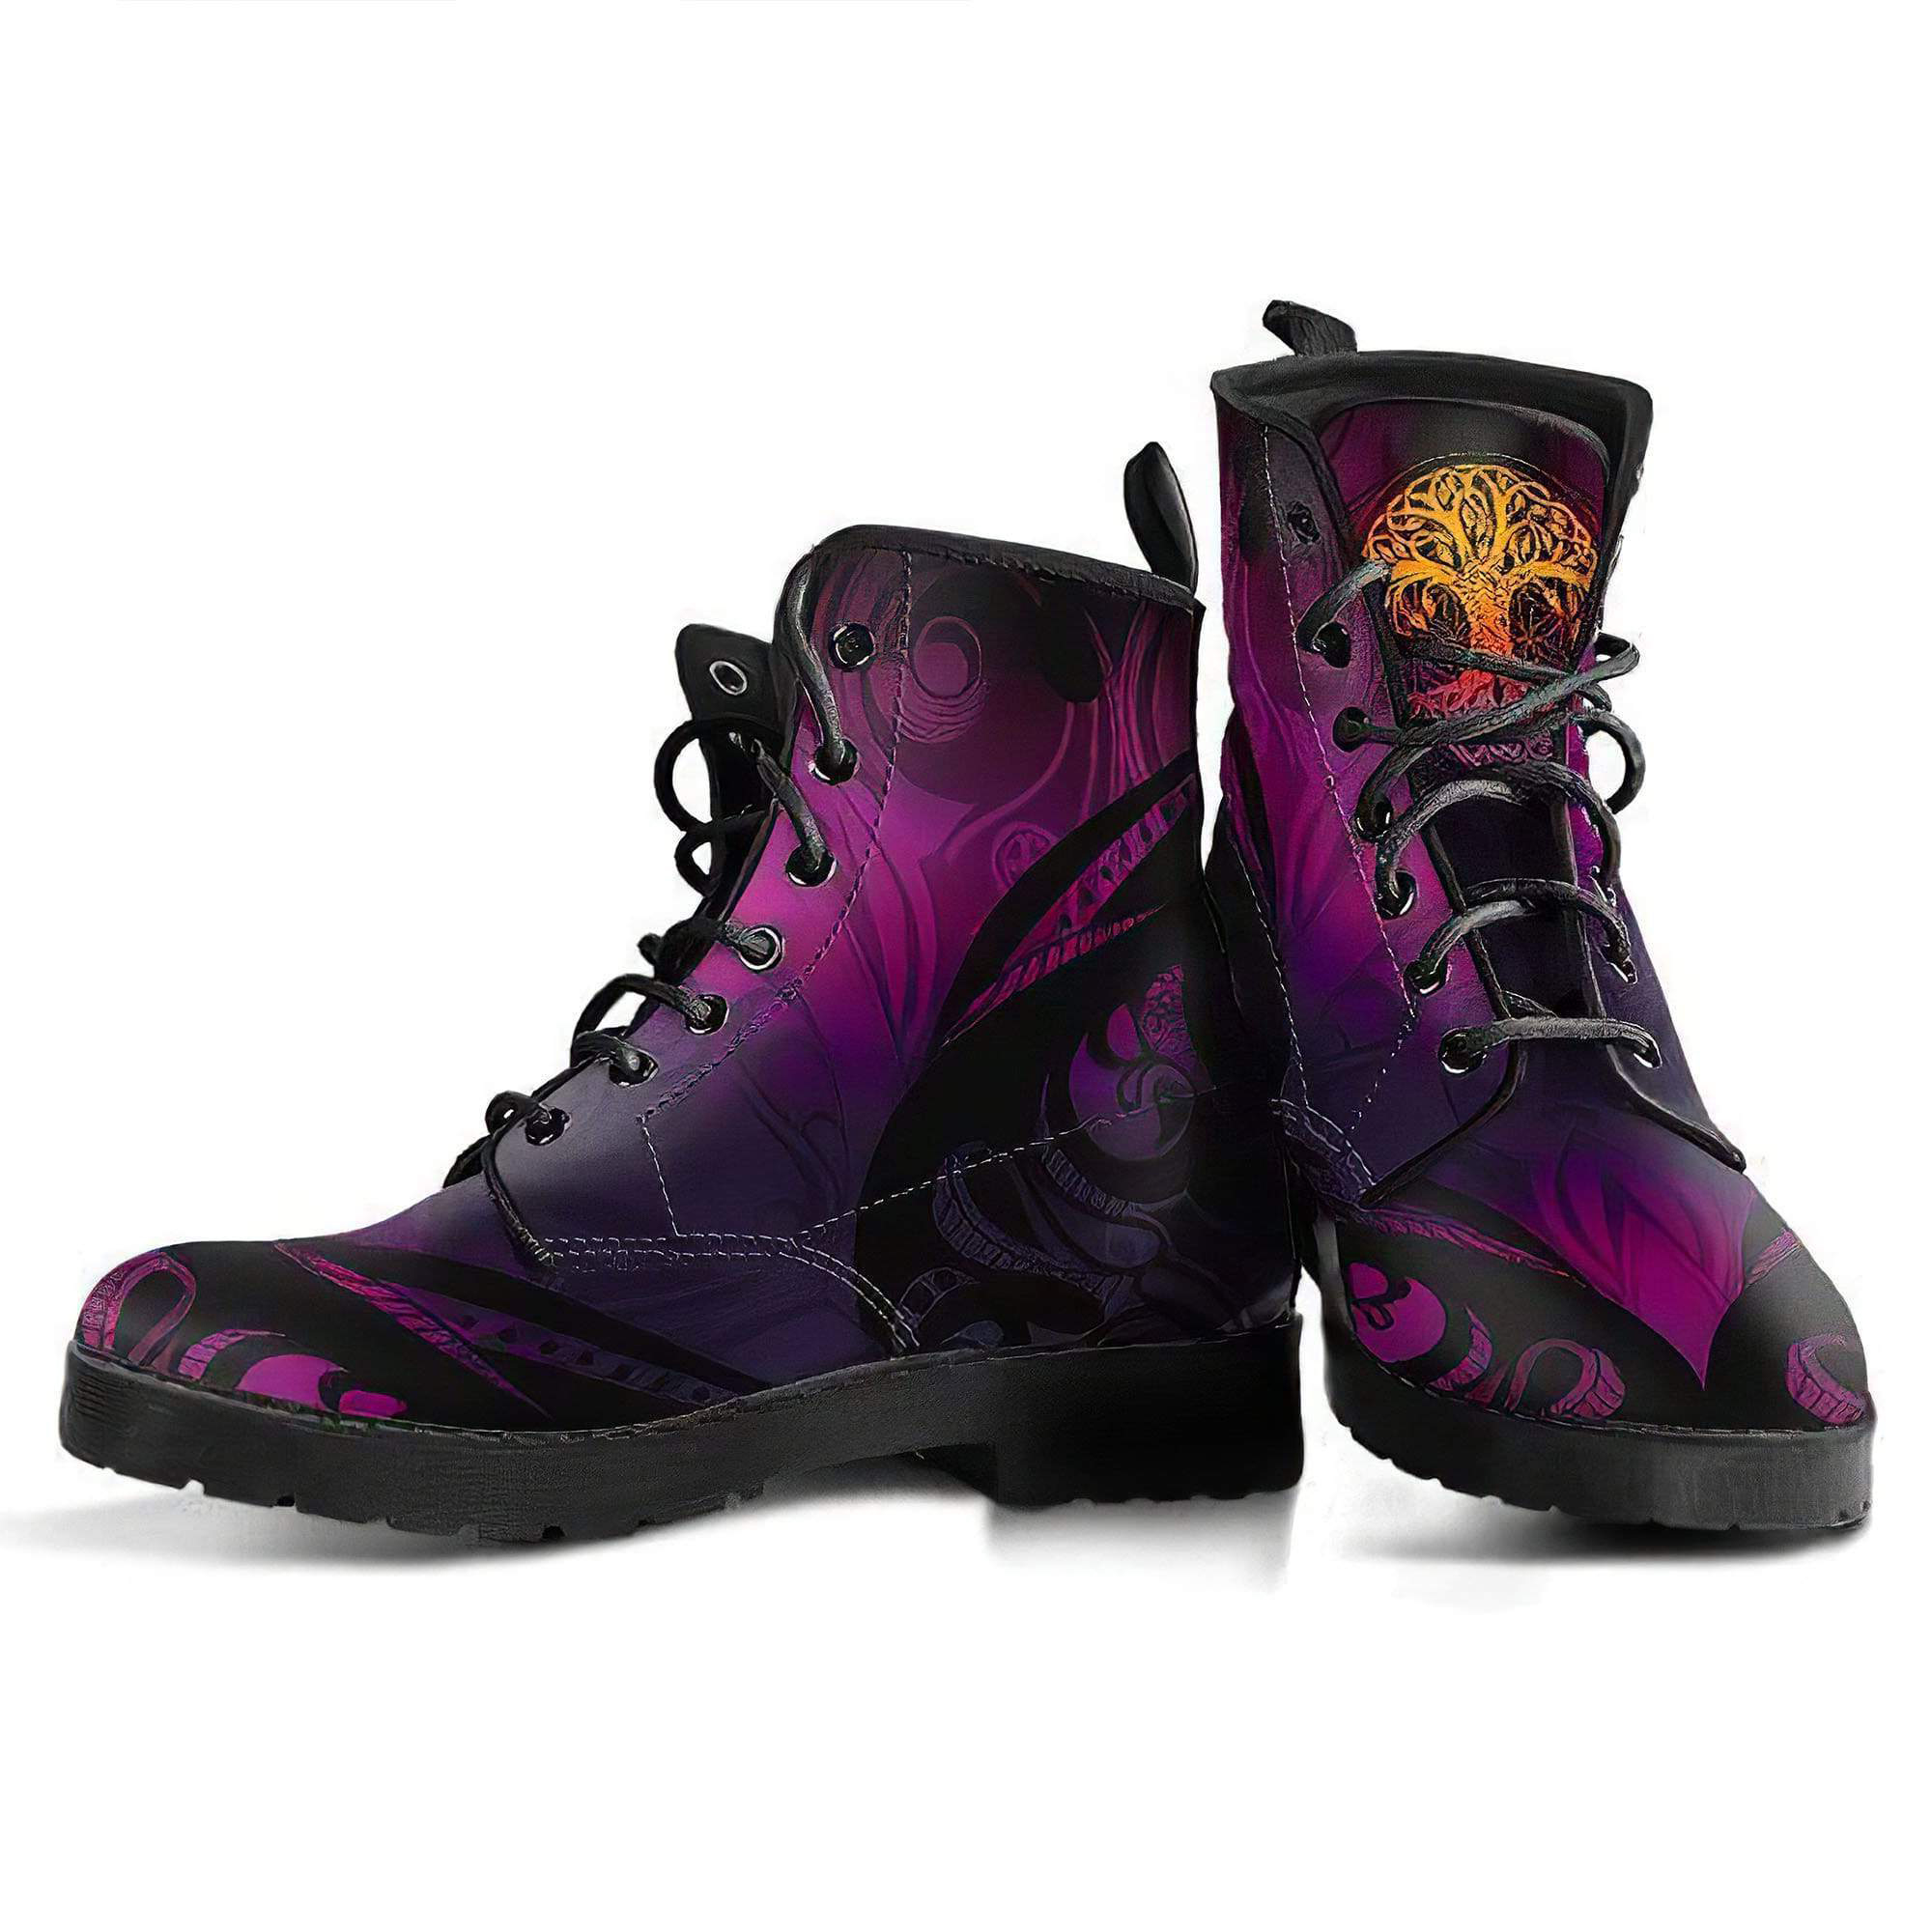 tree-of-life-women-s-leather-boots-purple-women-s-leather-boots-12051969048637.jpg